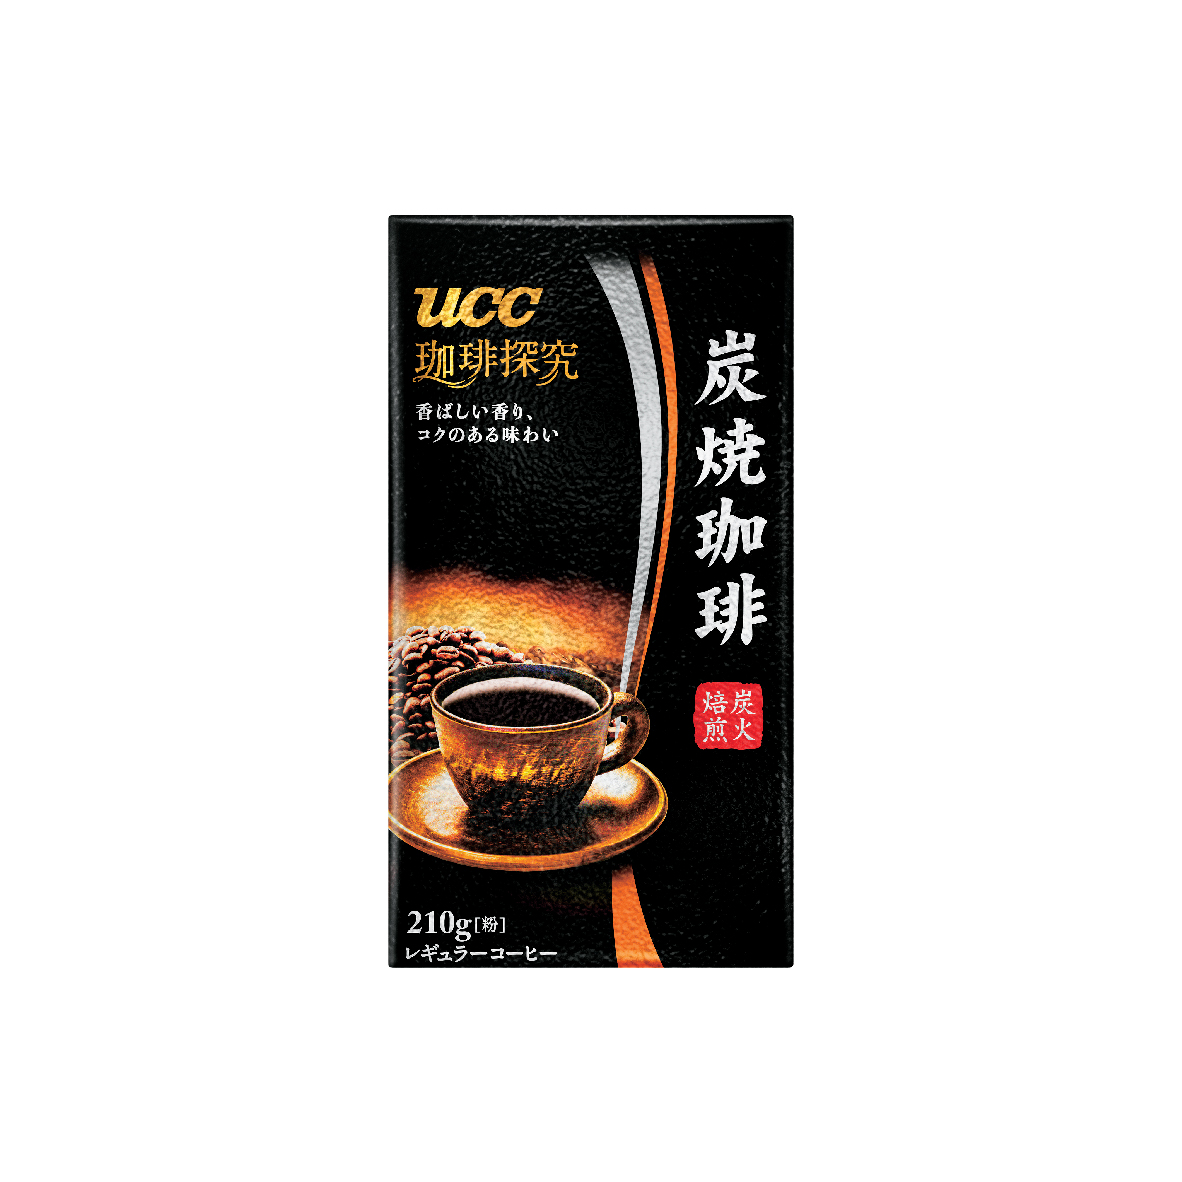 UCC Coffee Exploration Charcoal Roasted Coffee